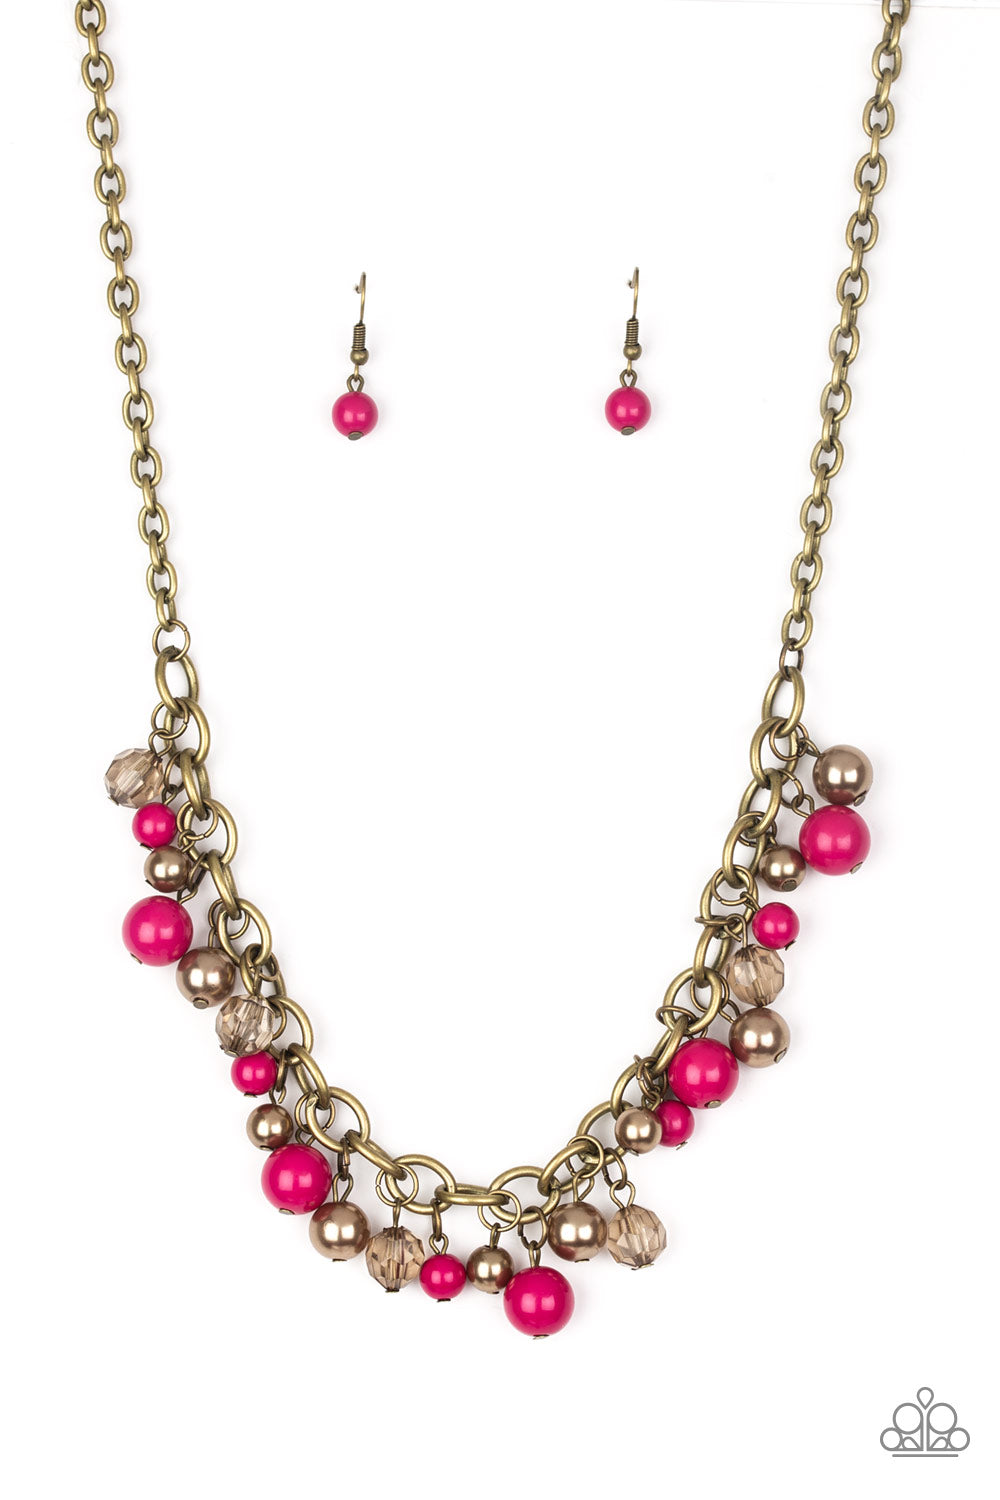 Paparazzi Necklaces - The Grit Crowd - Pink